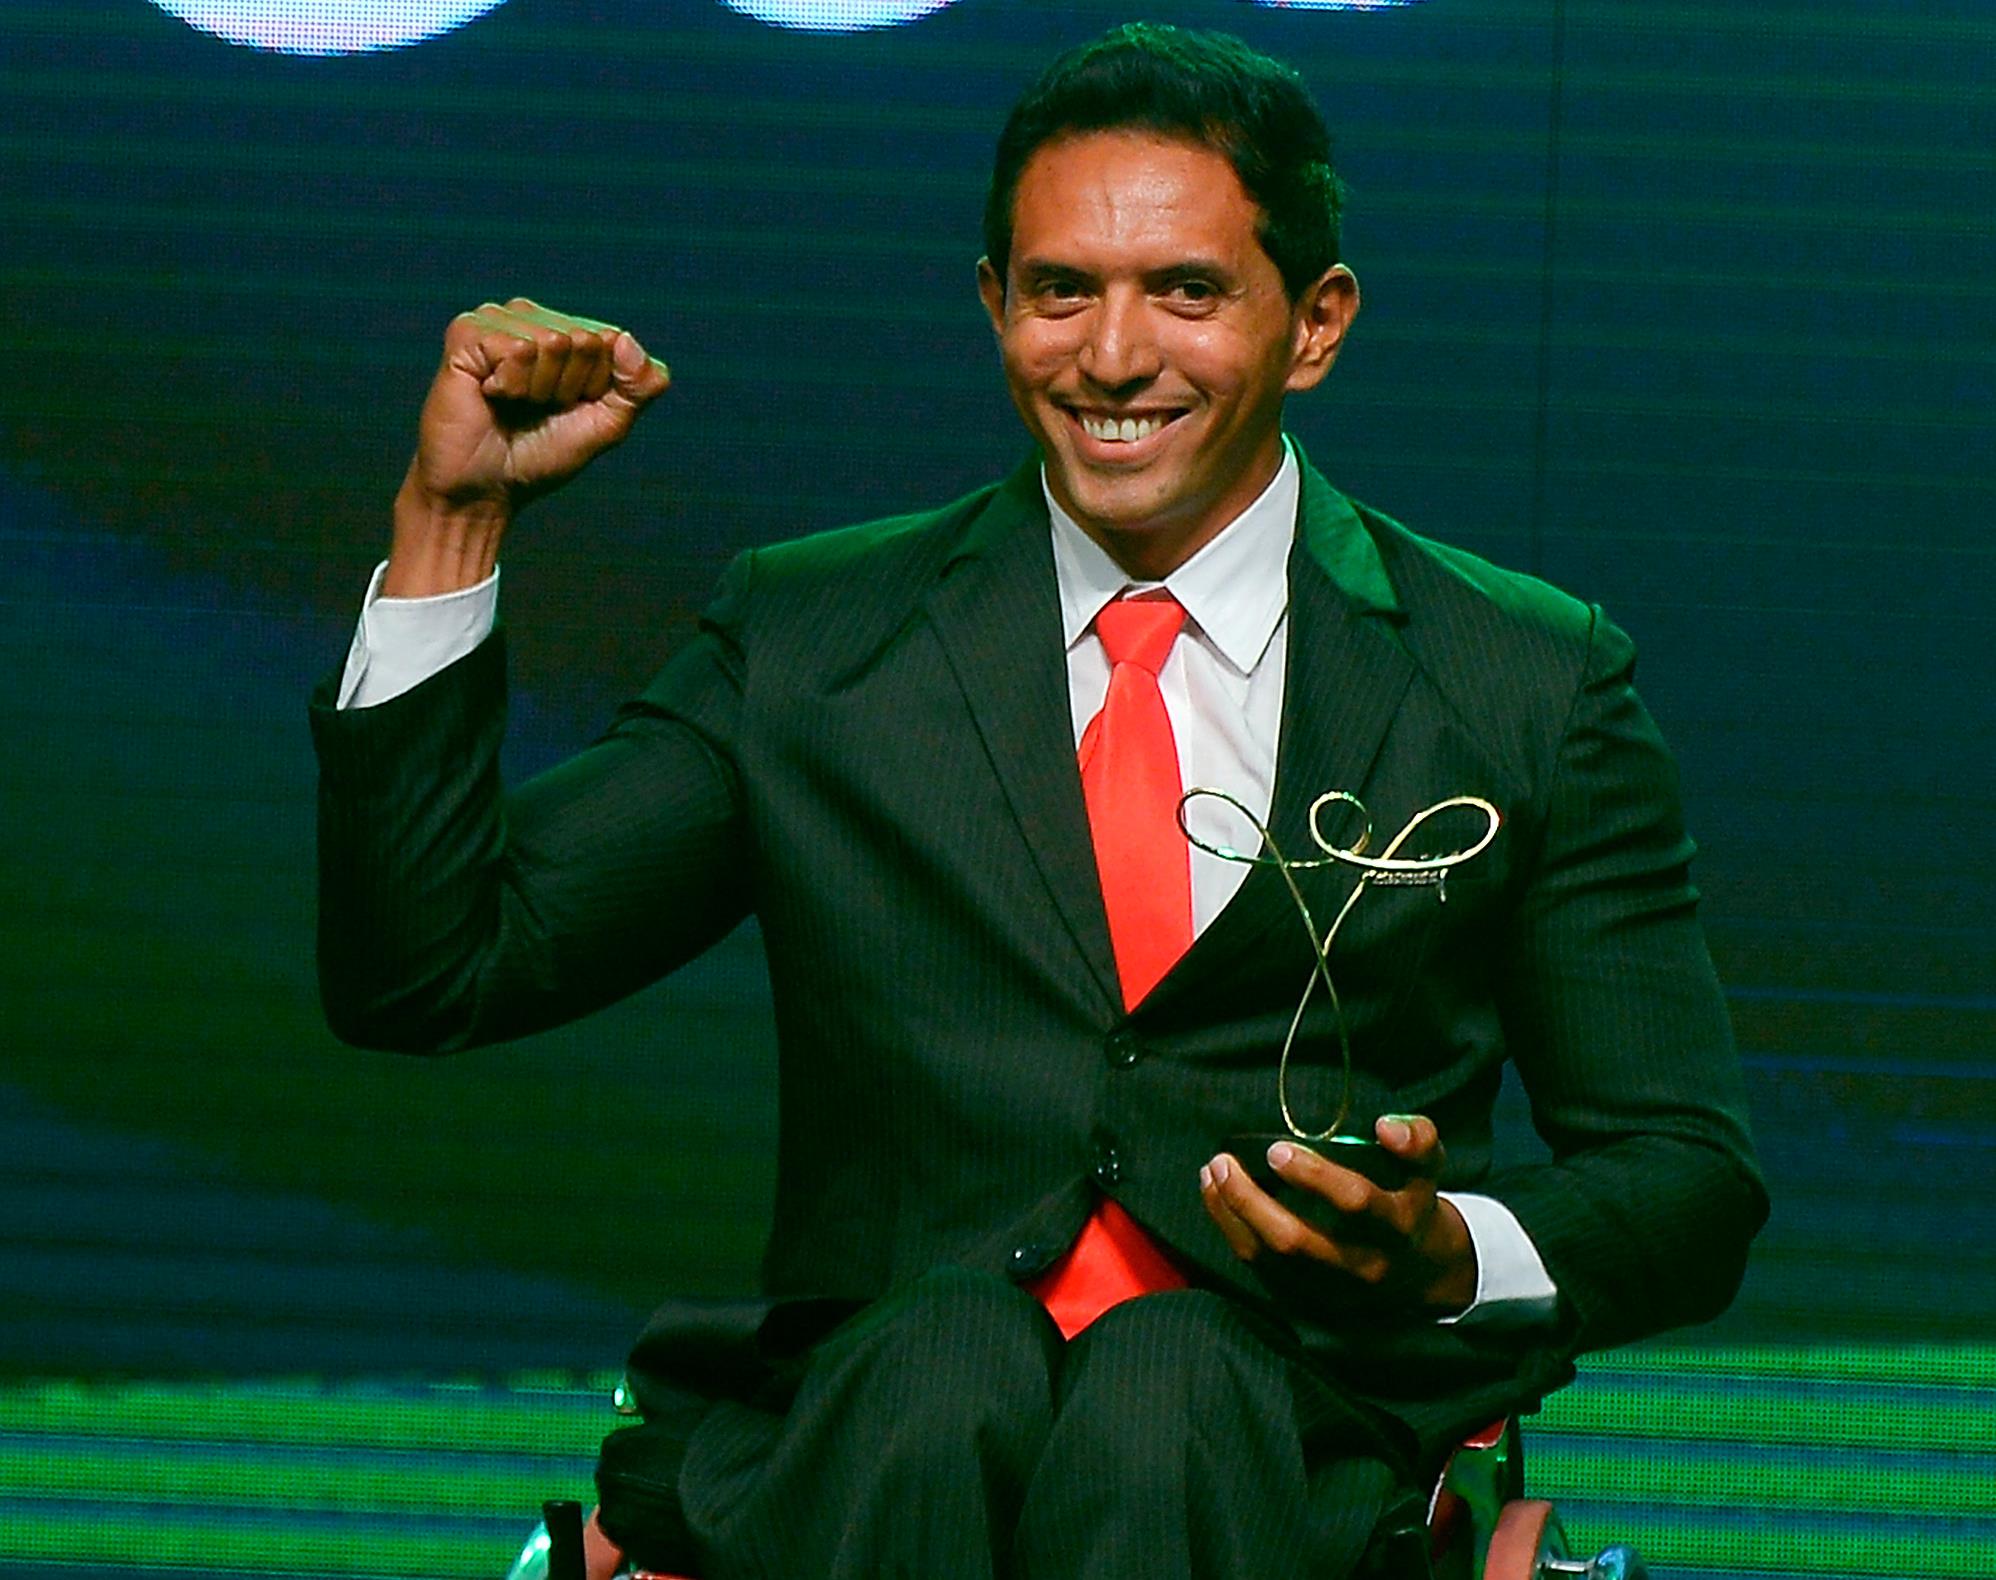 Luis Carlos Cardoso da Silva poses with his trophy won in the Paracanoe category of the Brazil Paralympics 2014 Awards Ceremony.